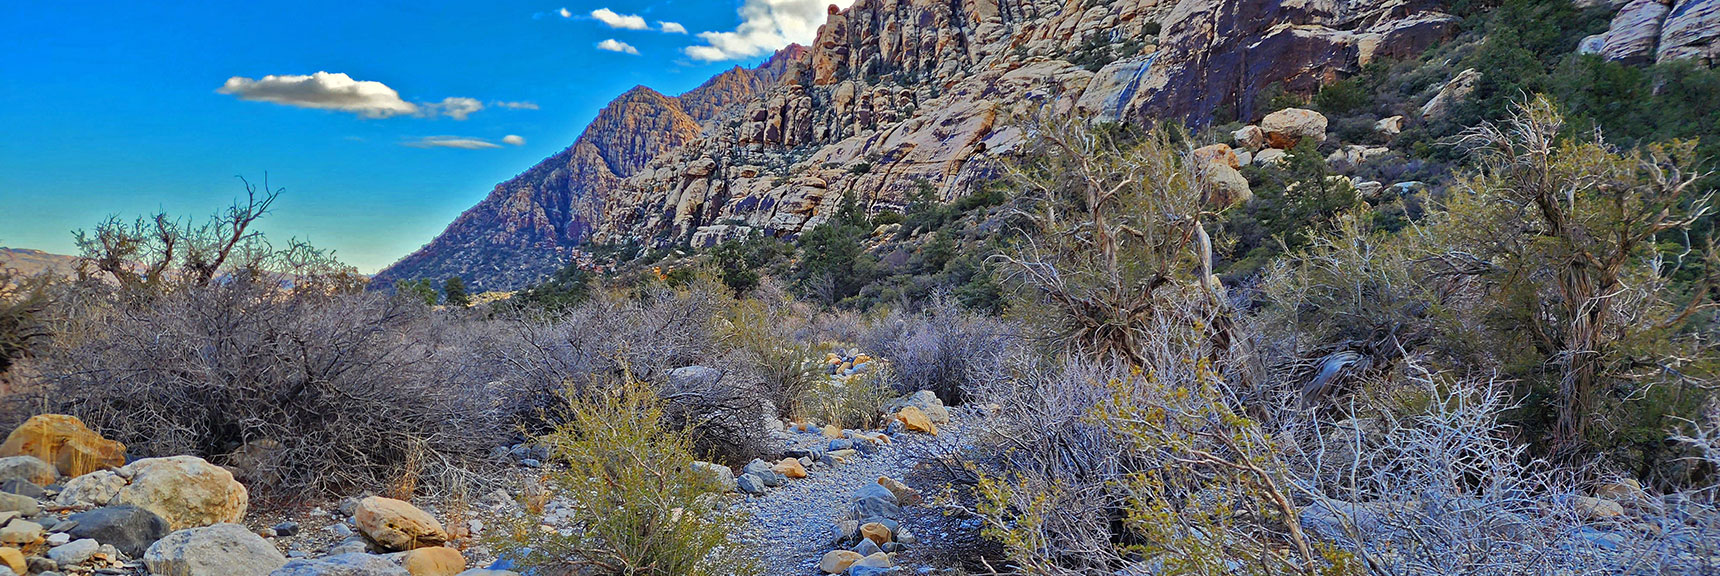 Again, Soon You'll Leave the Arid Desert and Enter a Lush Green Zone | Willow Spring Loop, Petroglyph Canyon, Lost Creek Canyon | Red Rock Canyon National Conservation Area, Nevada